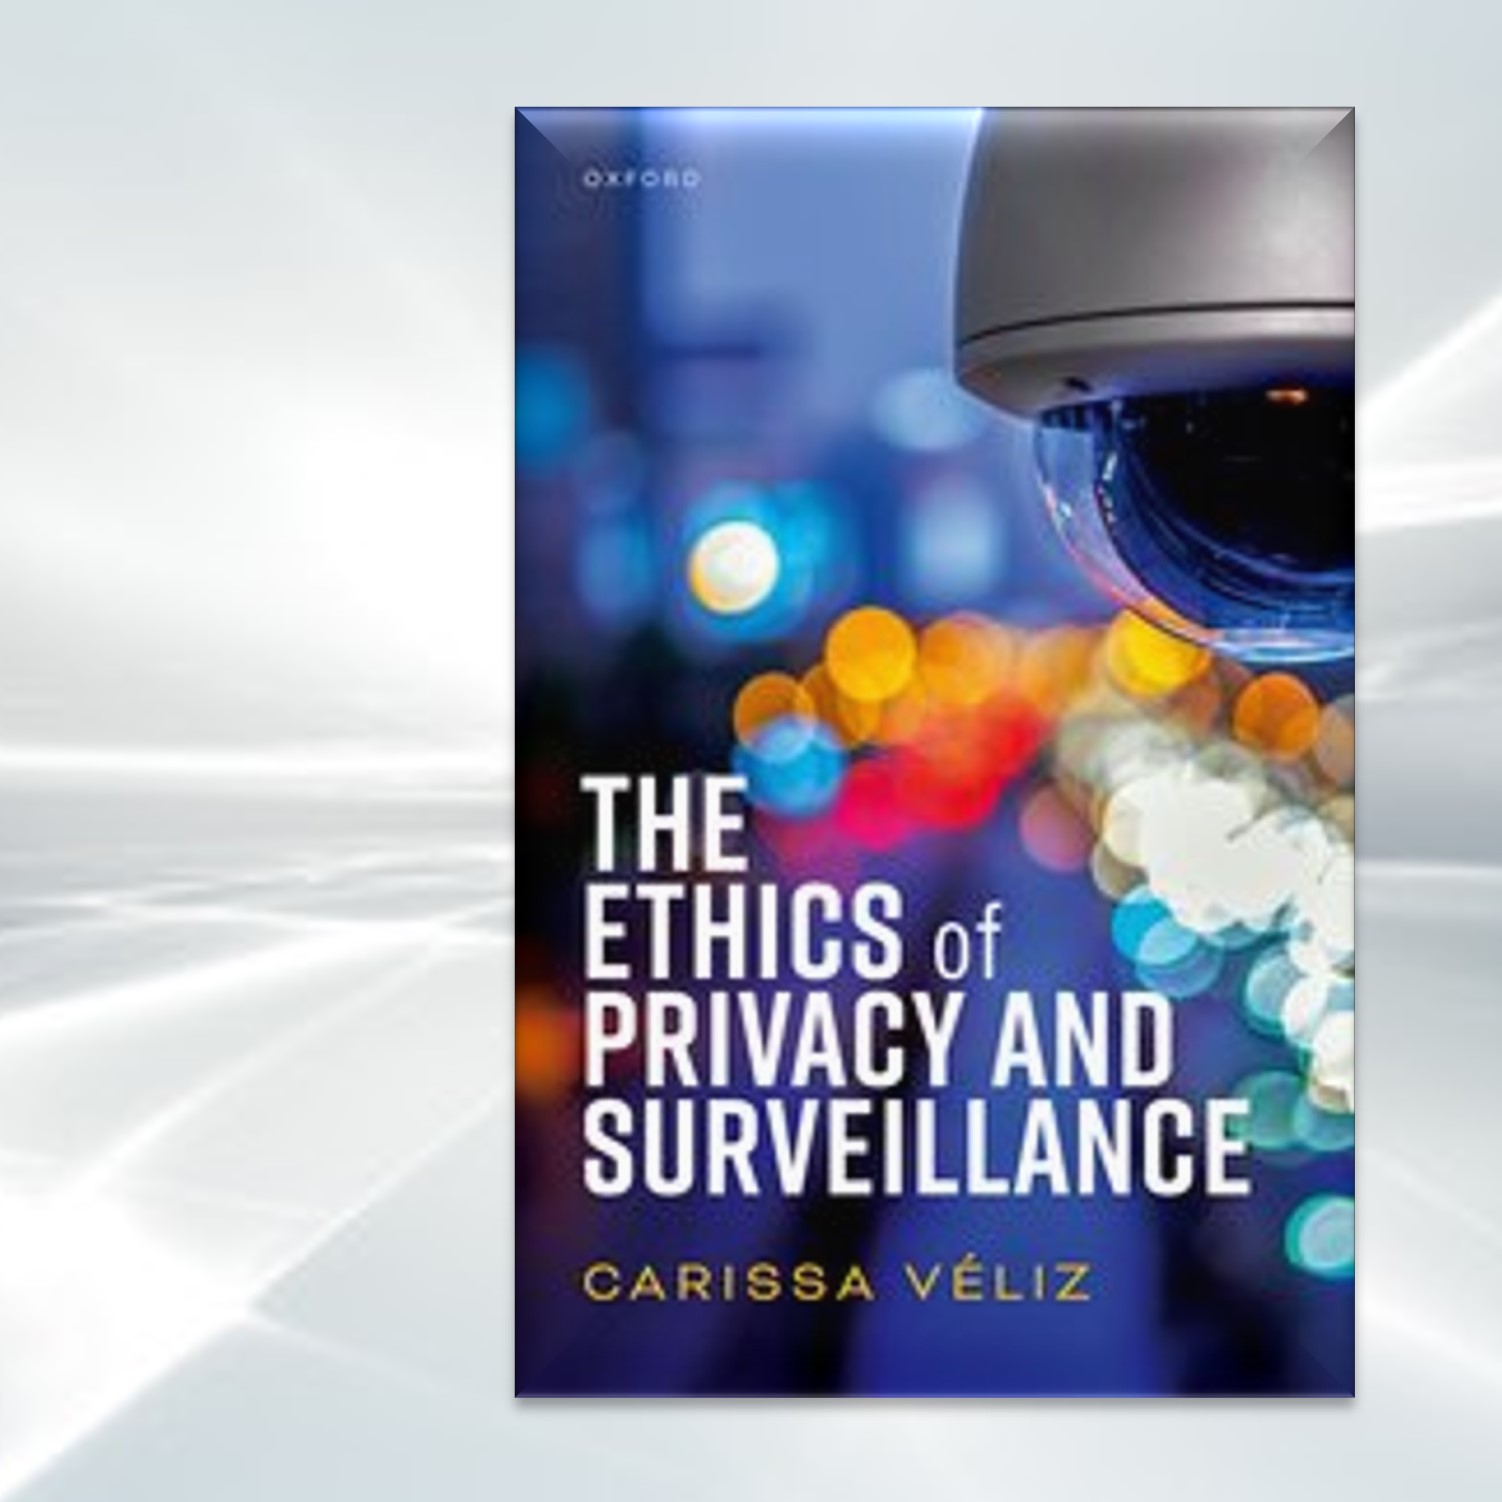 The Ethics of Privacy and Surveillance book cover on grey background named white futuristic created by BazziBa from Adobe Stock